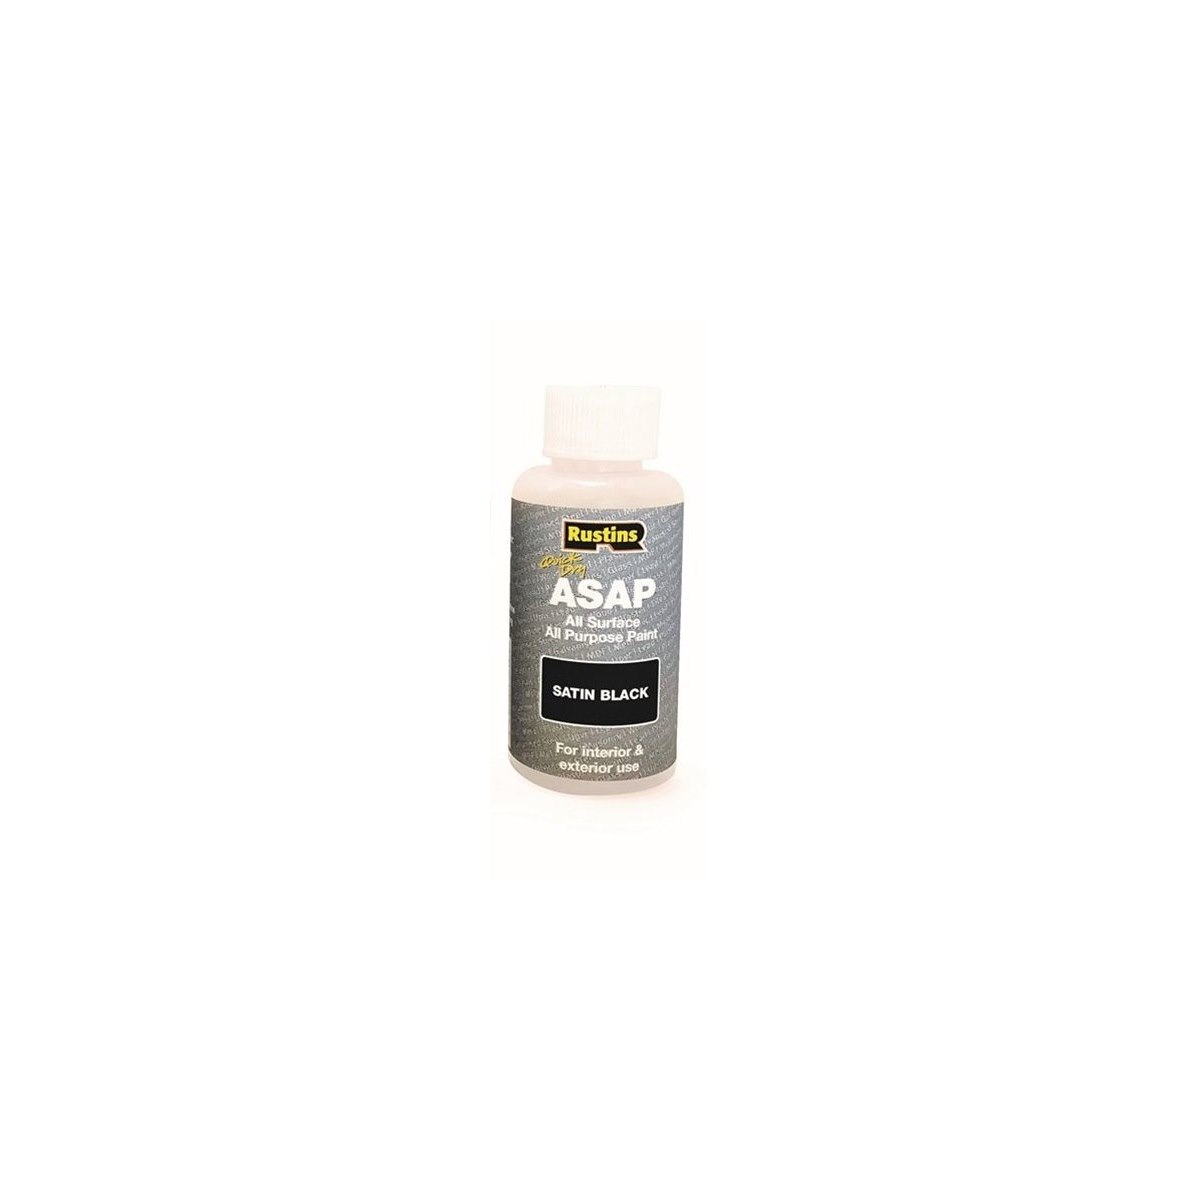 Rustins Quick Dry All Surface All Purpose Paint (ASAP) Black 50ml